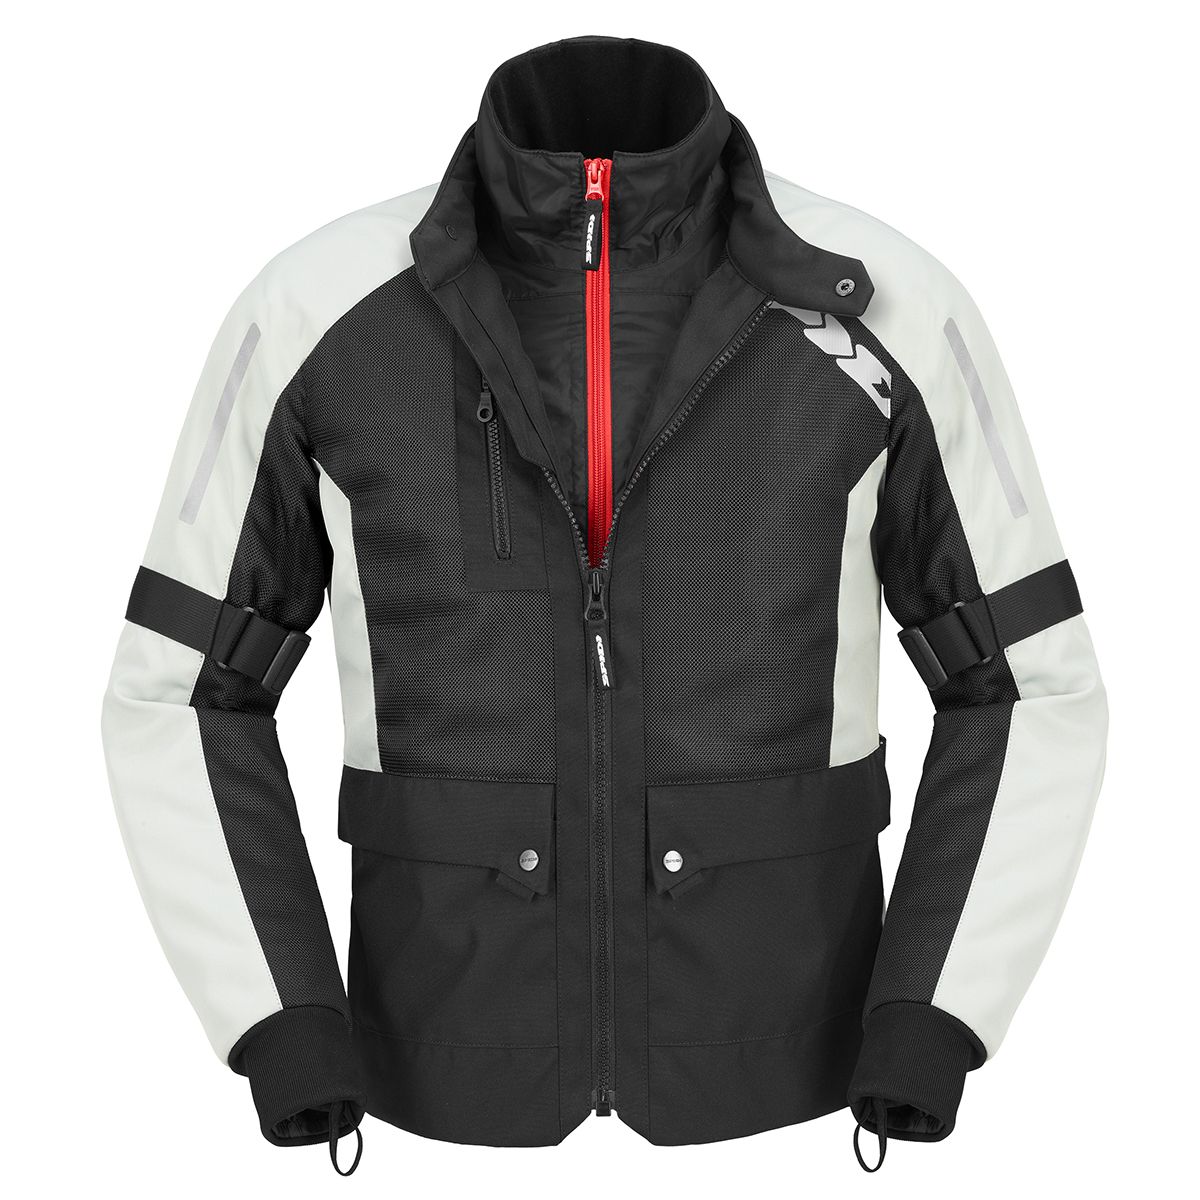 Image of Spidi Net H2OUT Jacket Black Ice Size S ID 8030161488845